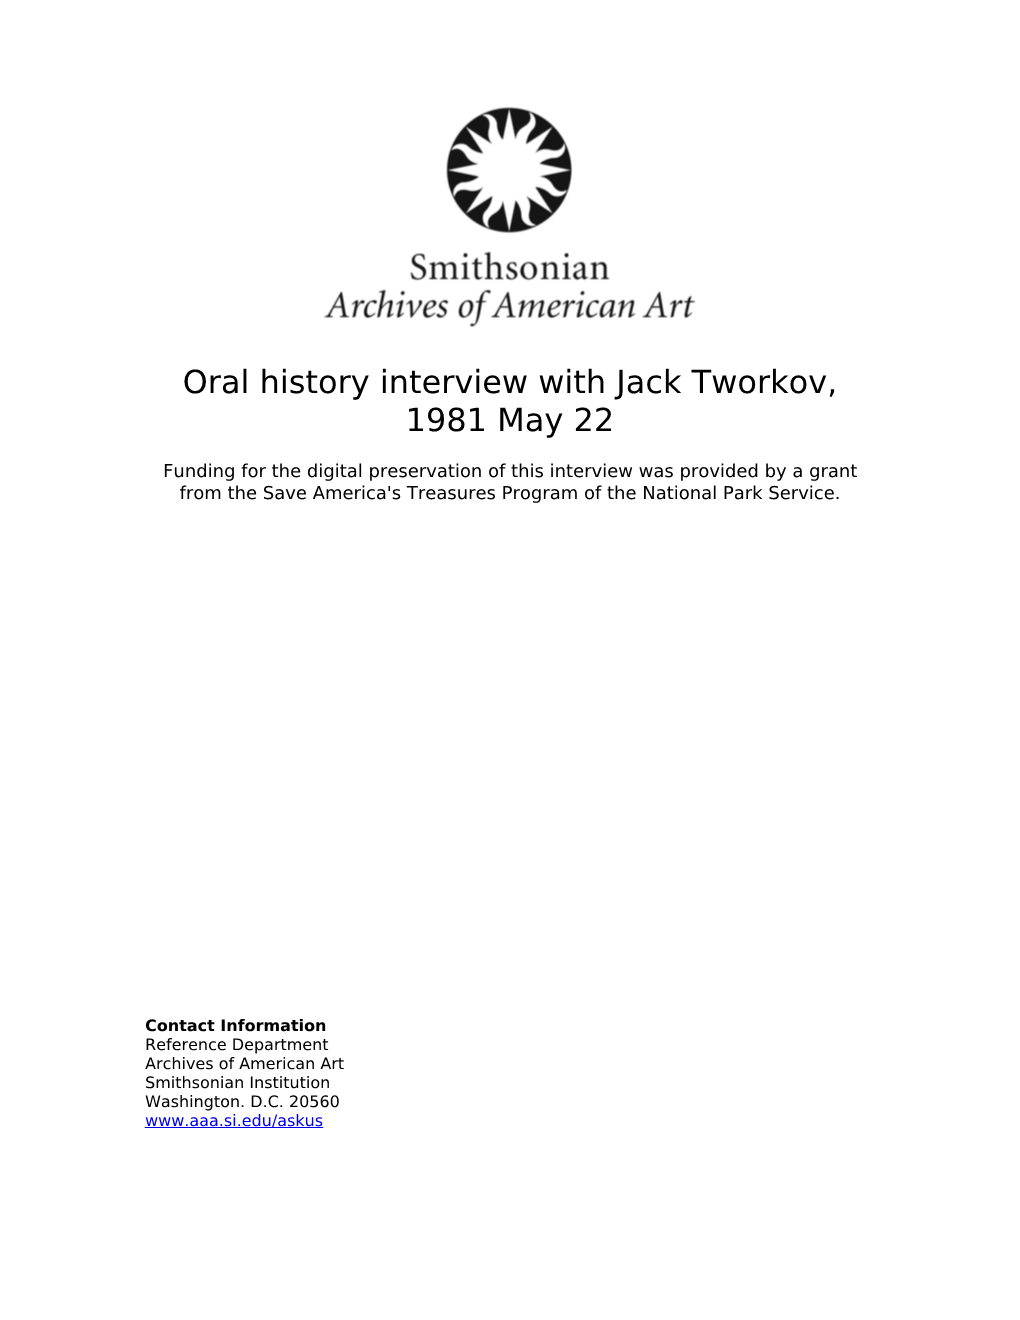 Oral History Interview with Jack Tworkov, 1981 May 22